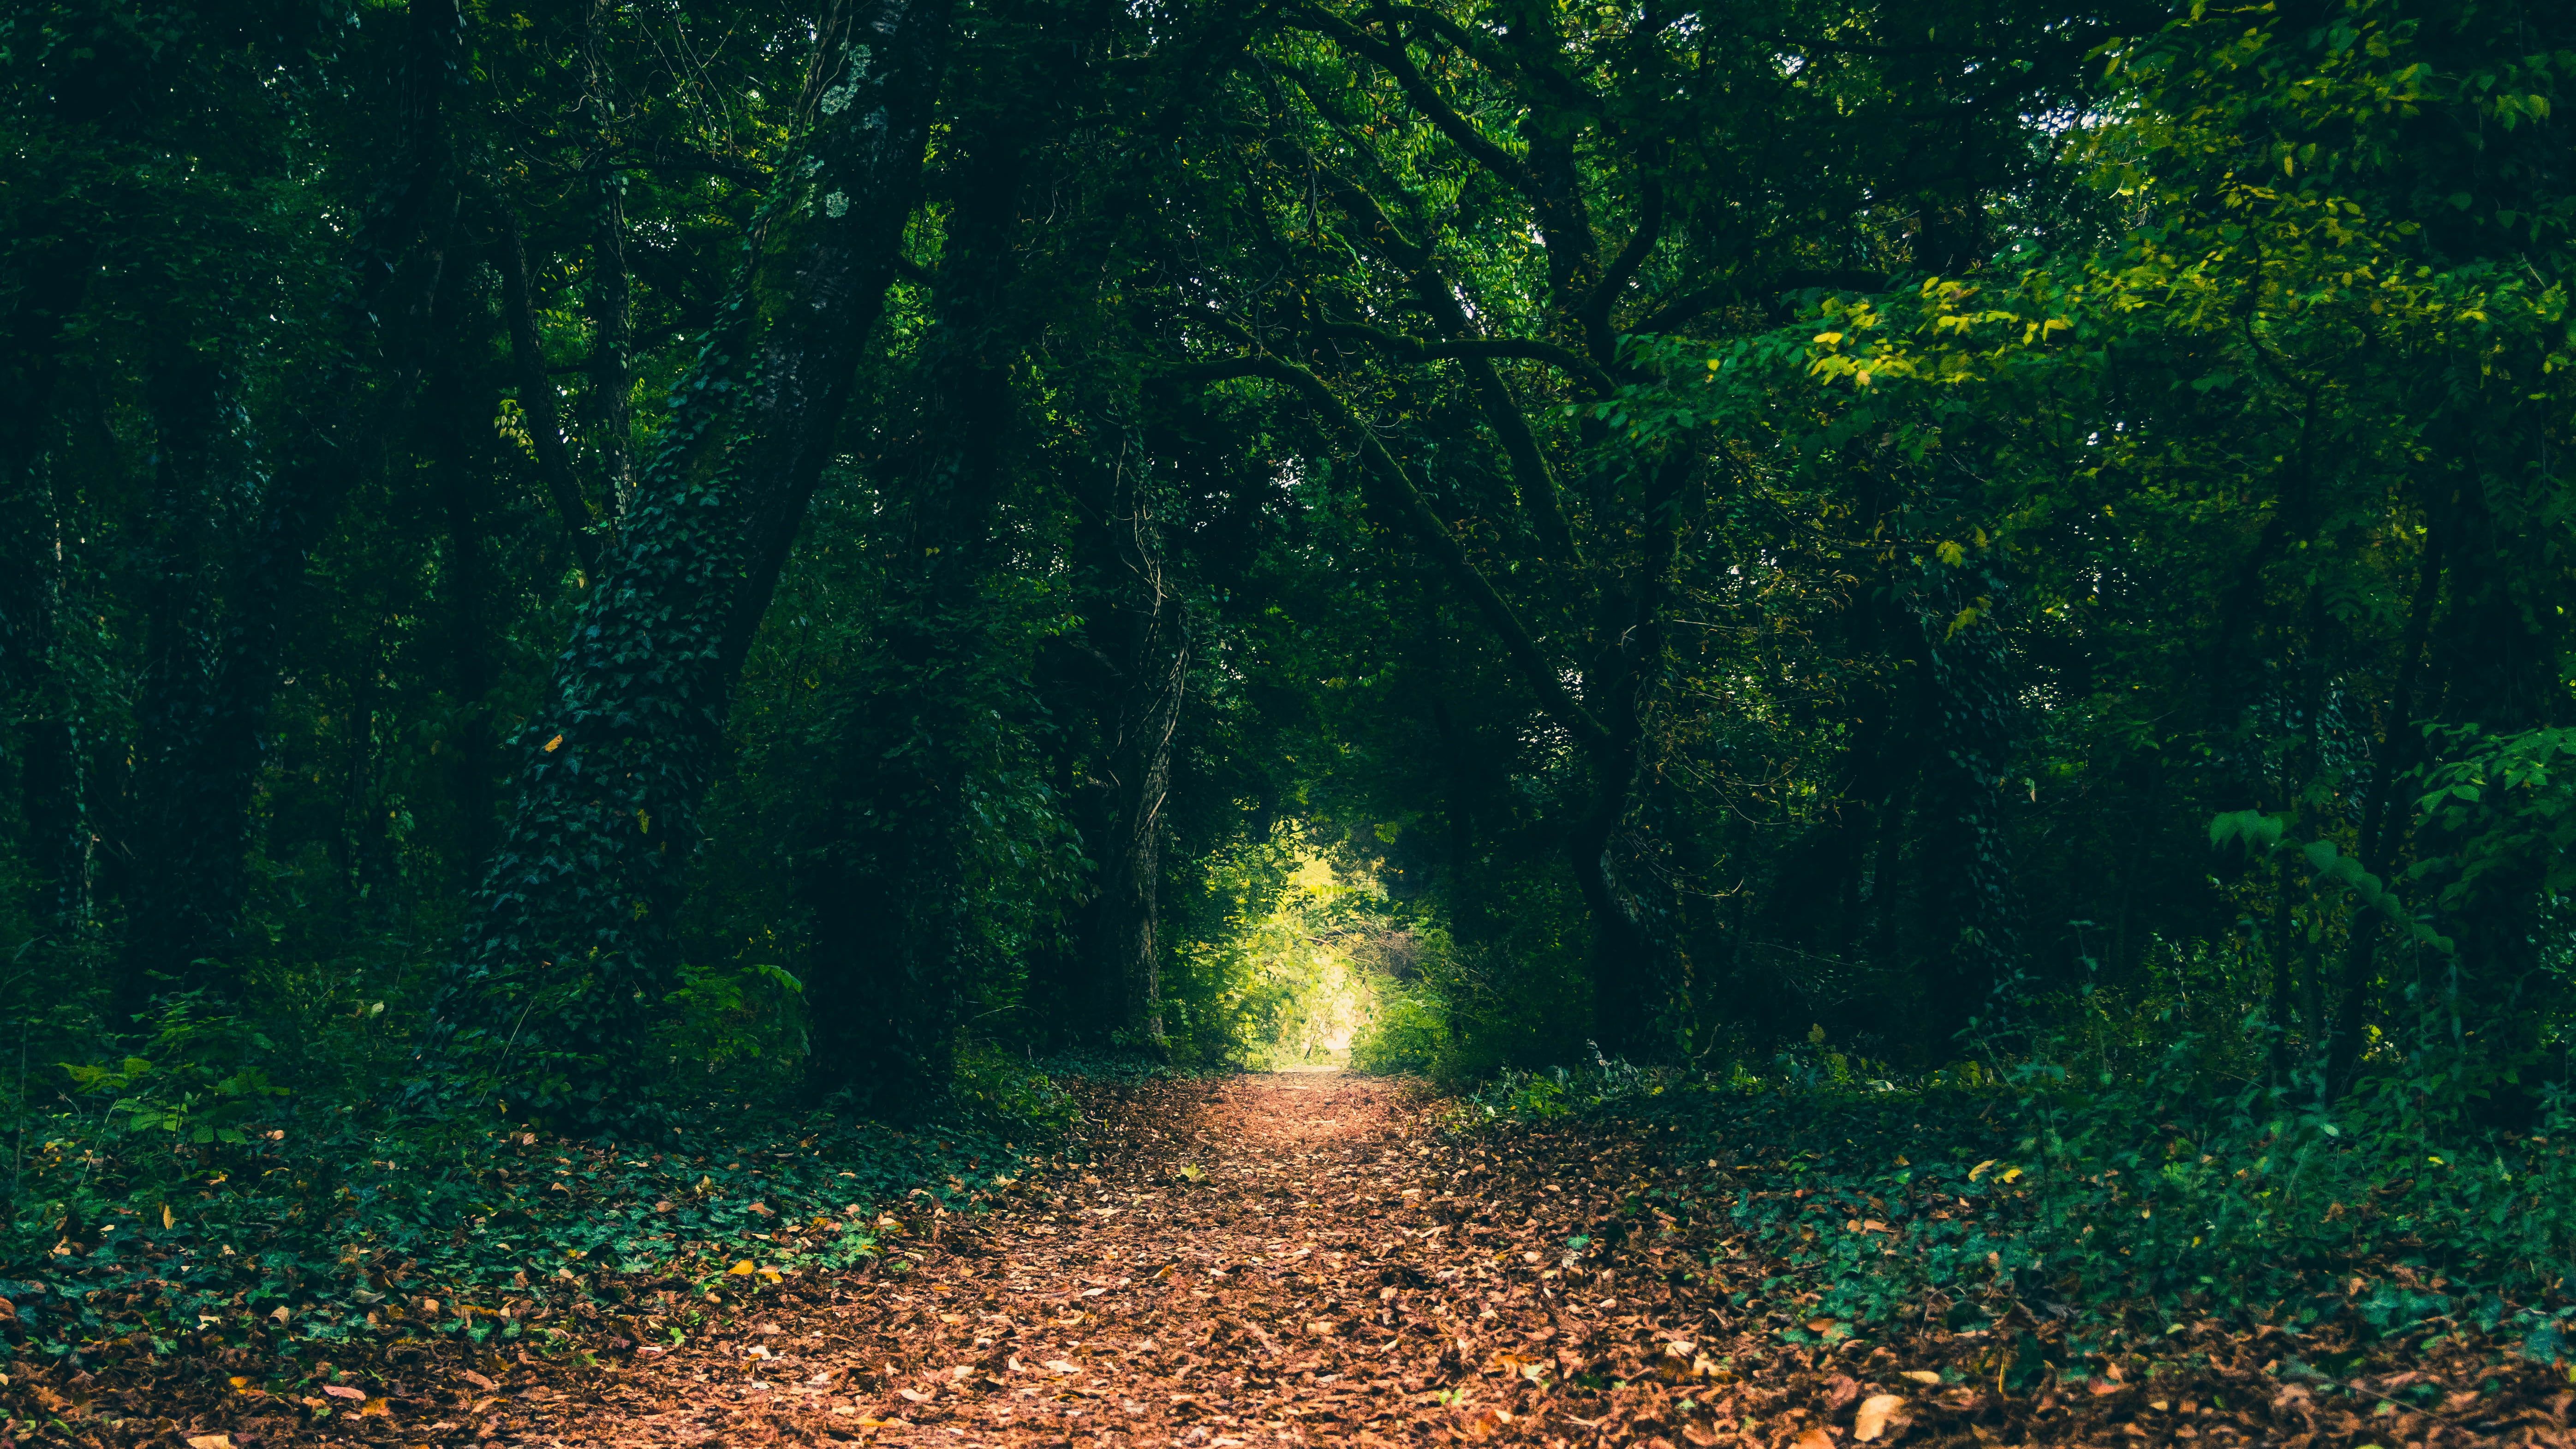 green trees #forest #path #leaves #trees #nature K #wallpaper